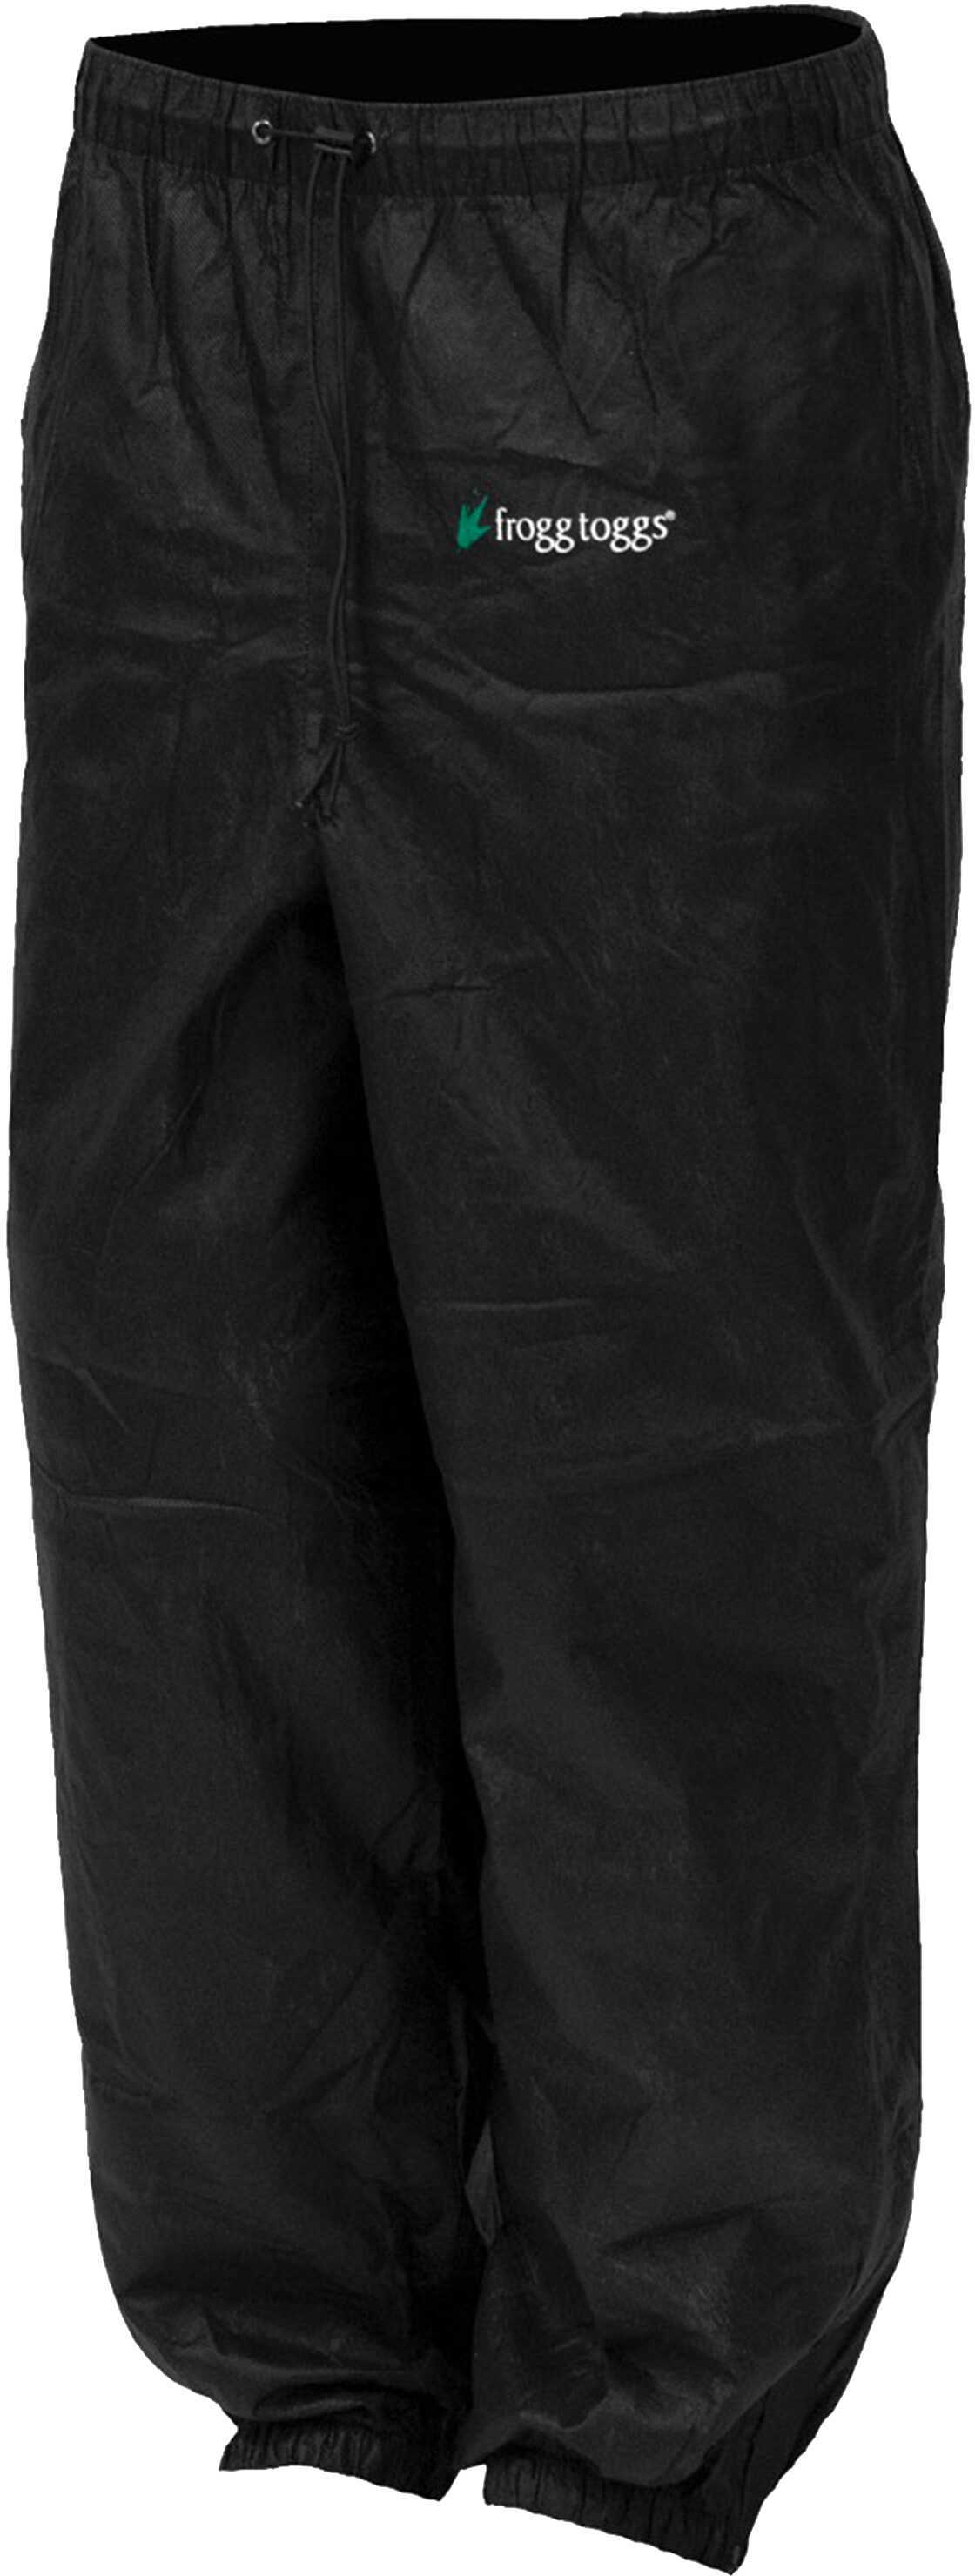 Frogg Toggs Pro Action Pant Ladies Black XLarge PA83522-01XL